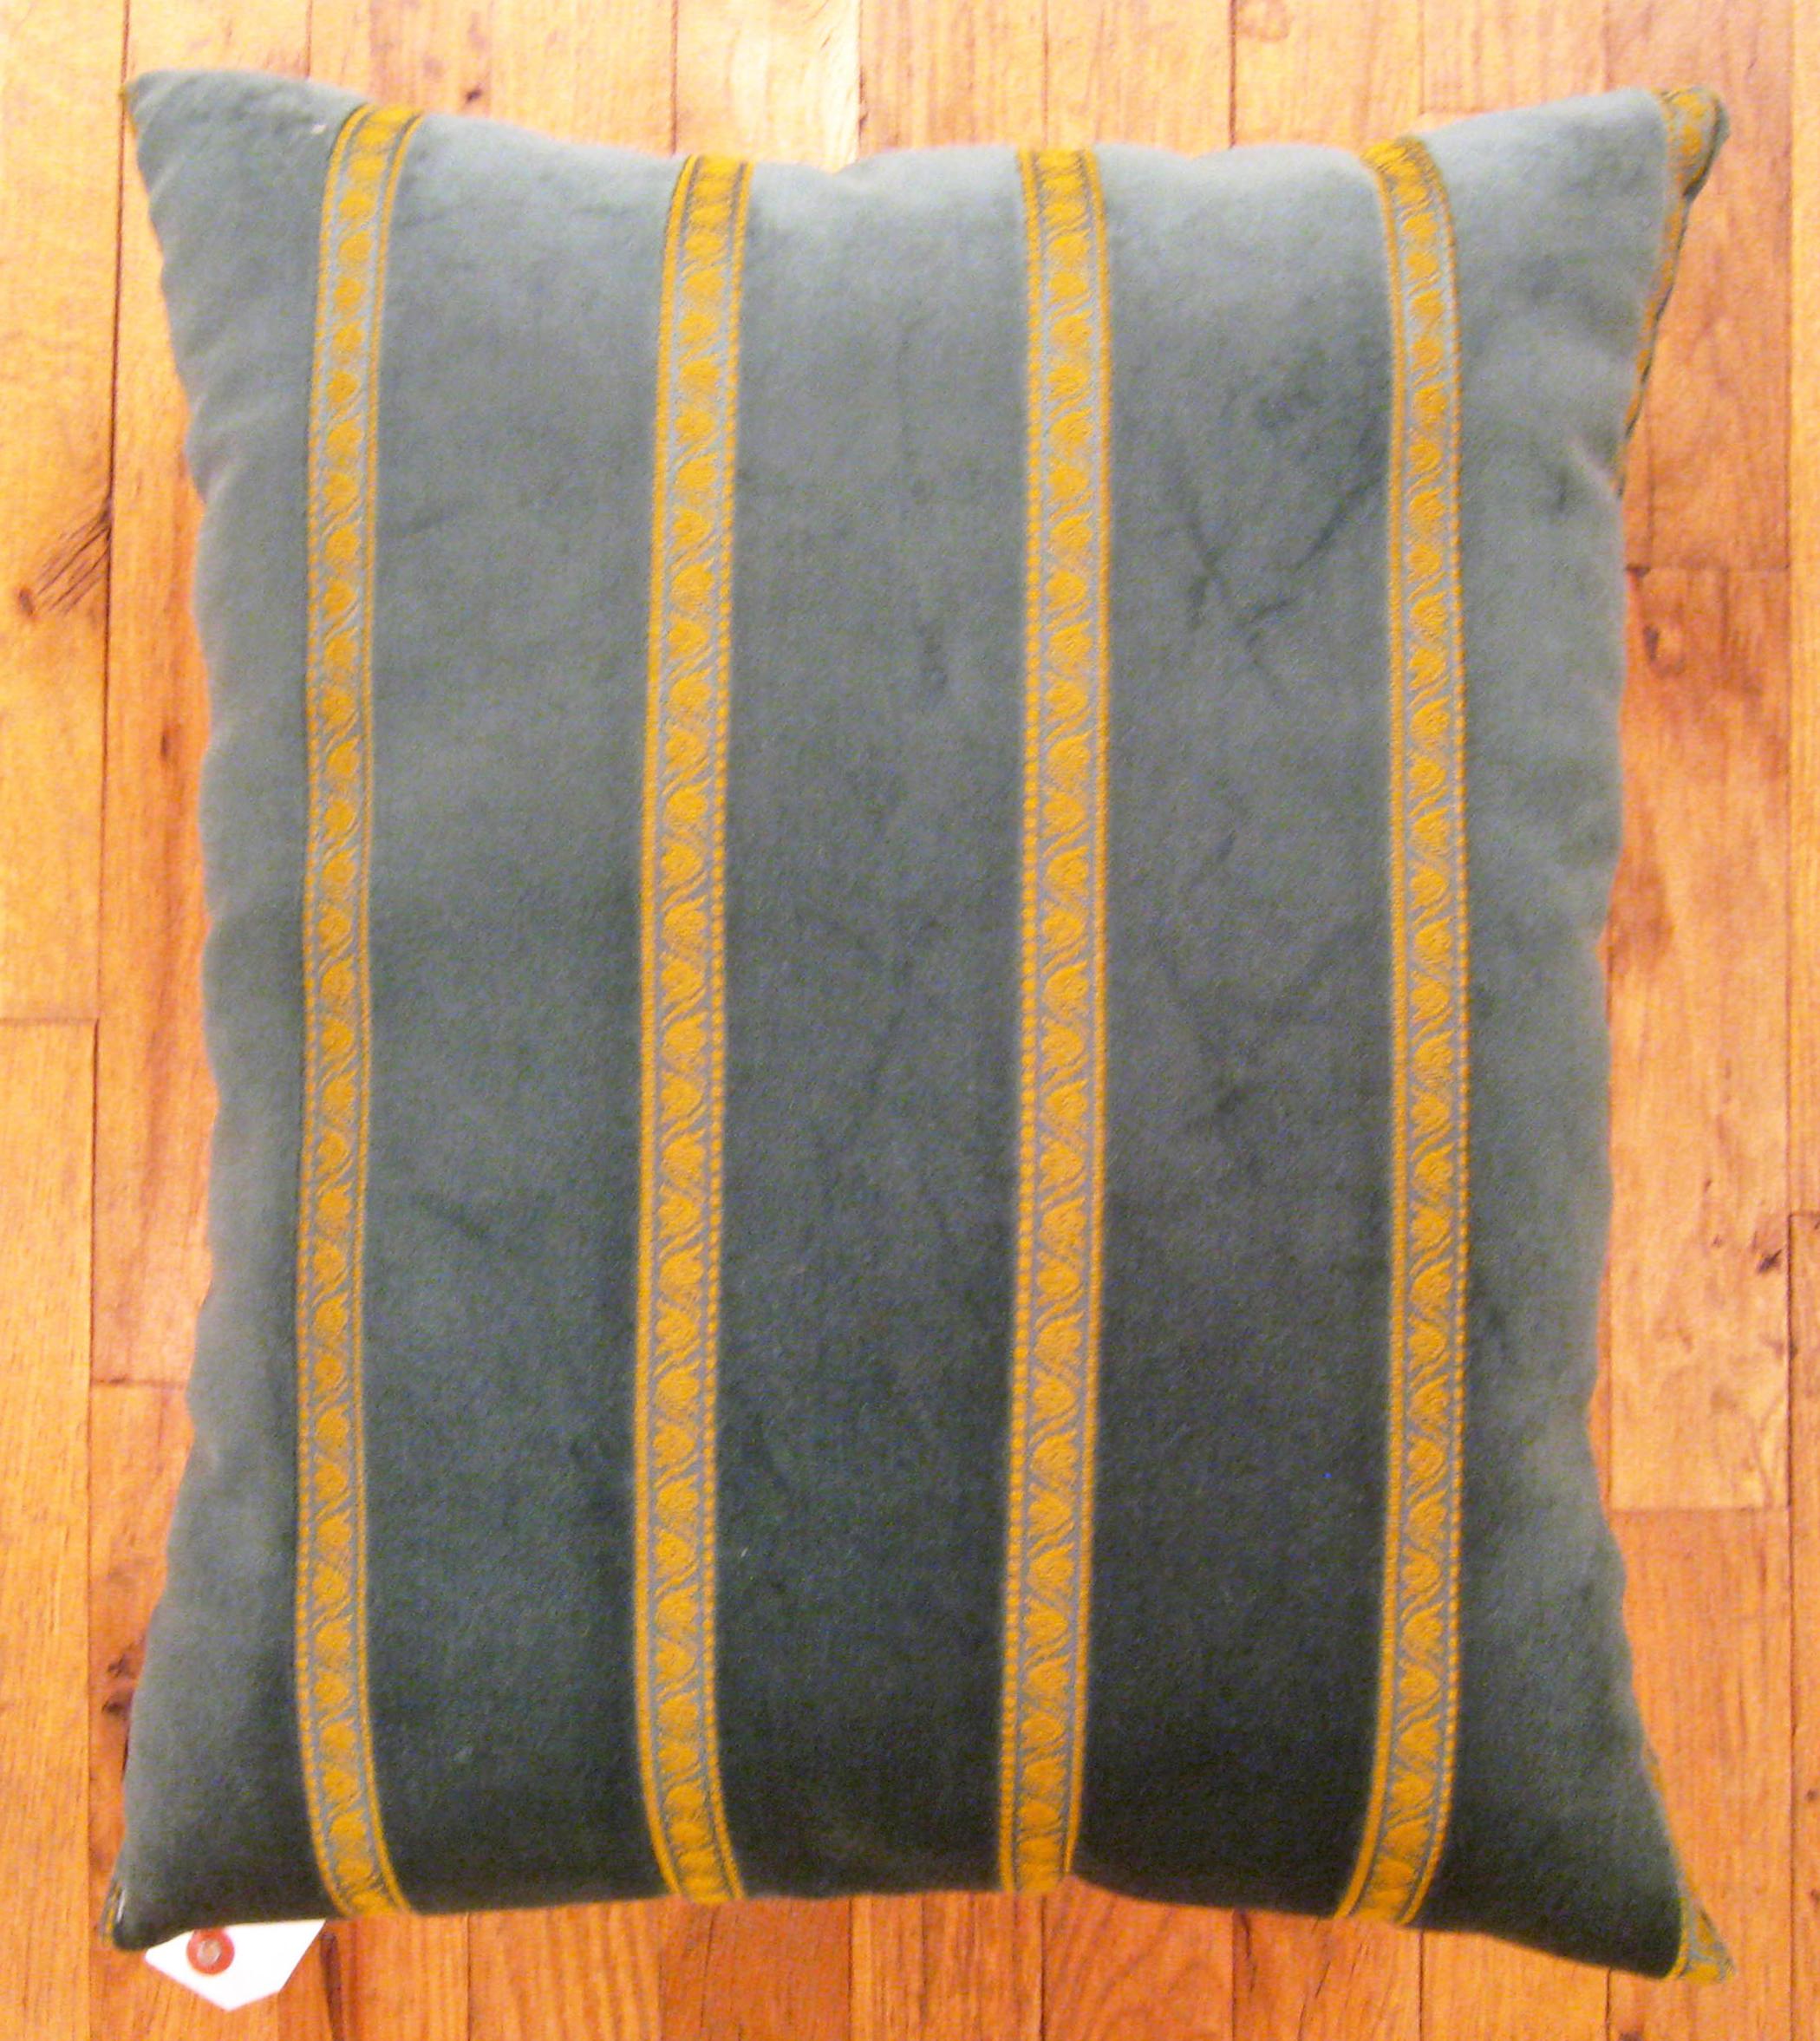 Vintage Green velvet American Art deco Pillow; size 22” x 19”. 
 
A vintage decorative pillow with art deco design in a green central field, size 22” x 19”. This lovely decorative pillow features a vintage fabric of a American Green velvet Art deco